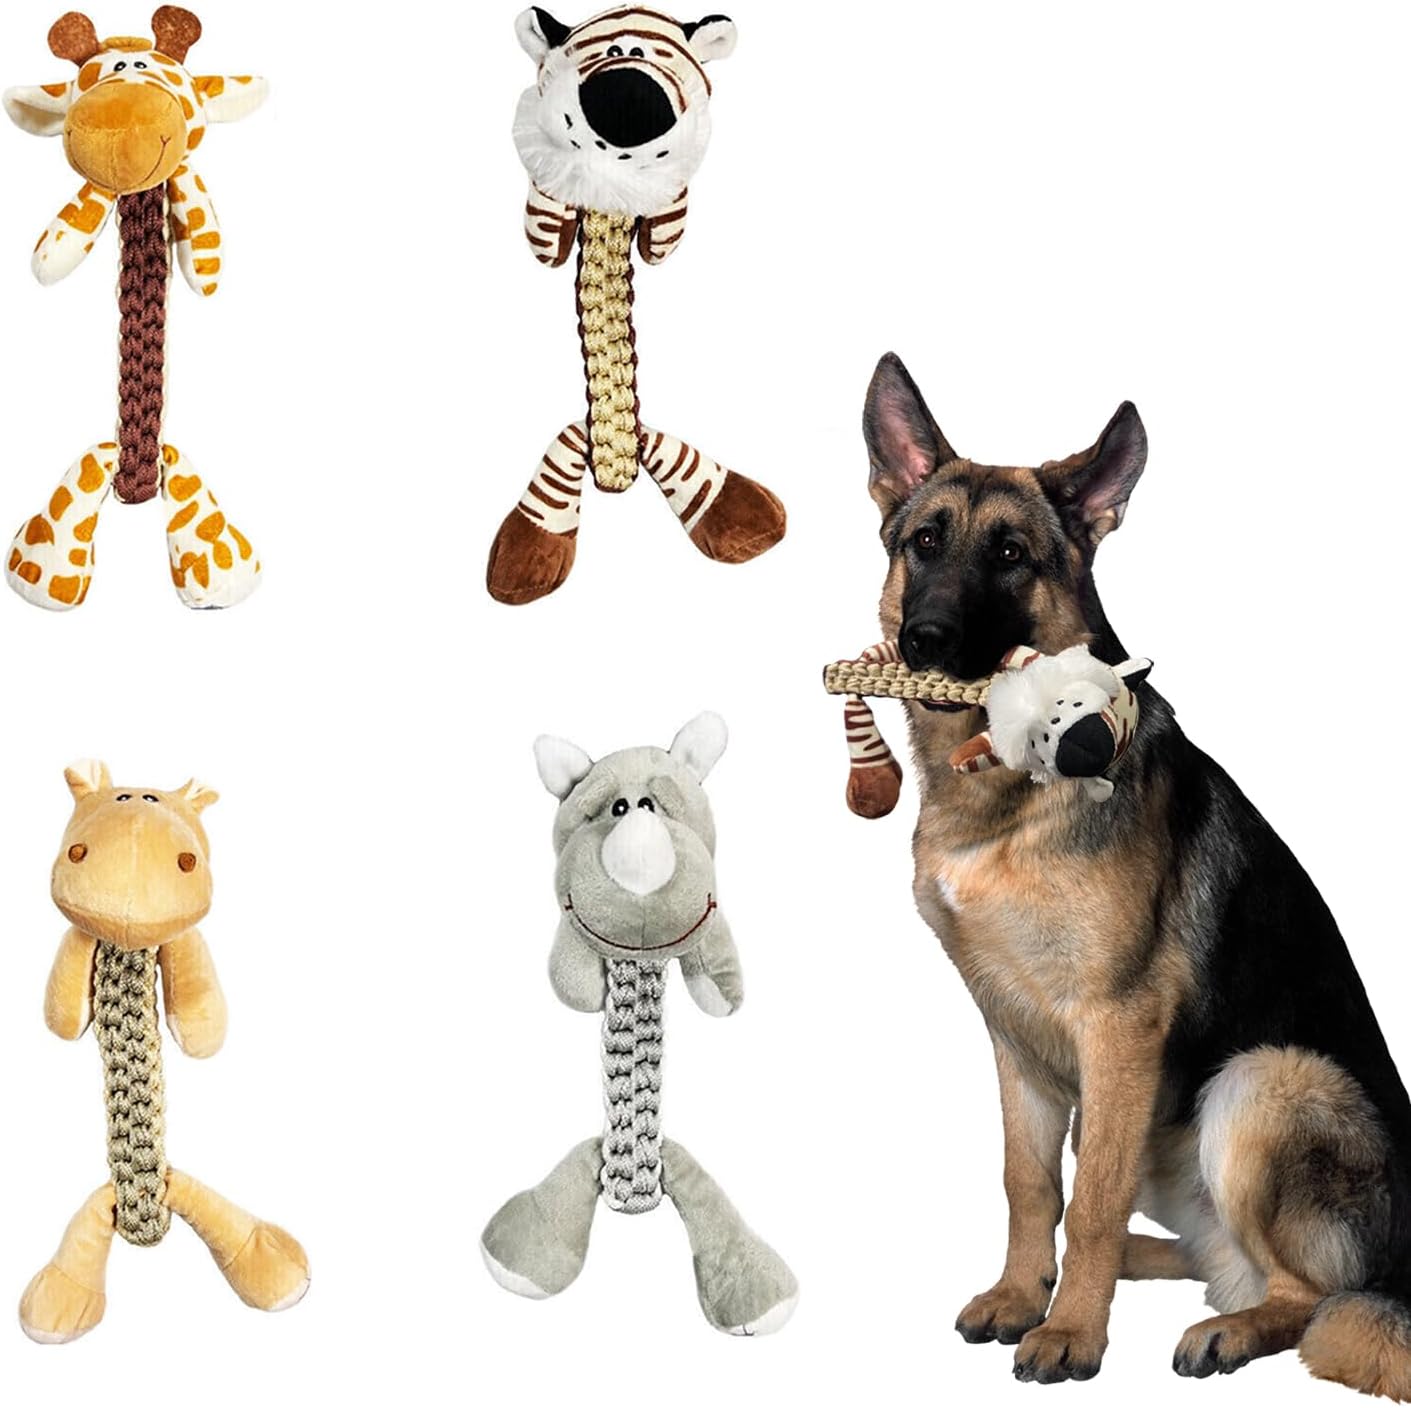 Hydrodogz [4 Pack] Zoo Pals Animal Dog Tug Rope Toys Assortment Bundle for Small Medium and Large Dogs, Natural Cotton Teething Interactive Strong Durable Chew Toys for Aggressive Chewers